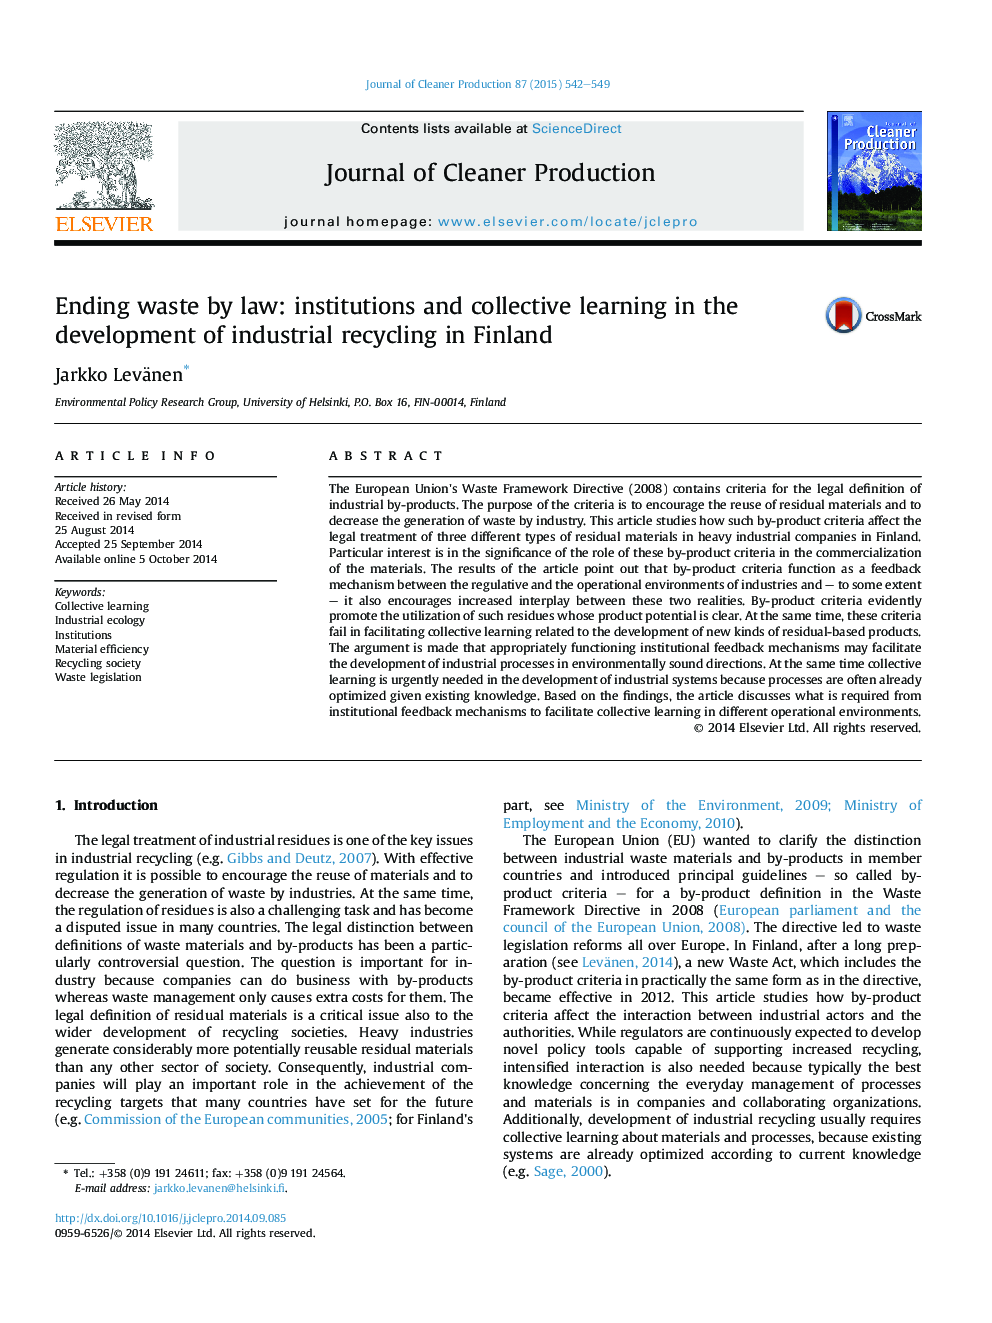 Ending waste by law: institutions and collective learning in the development of industrial recycling in Finland